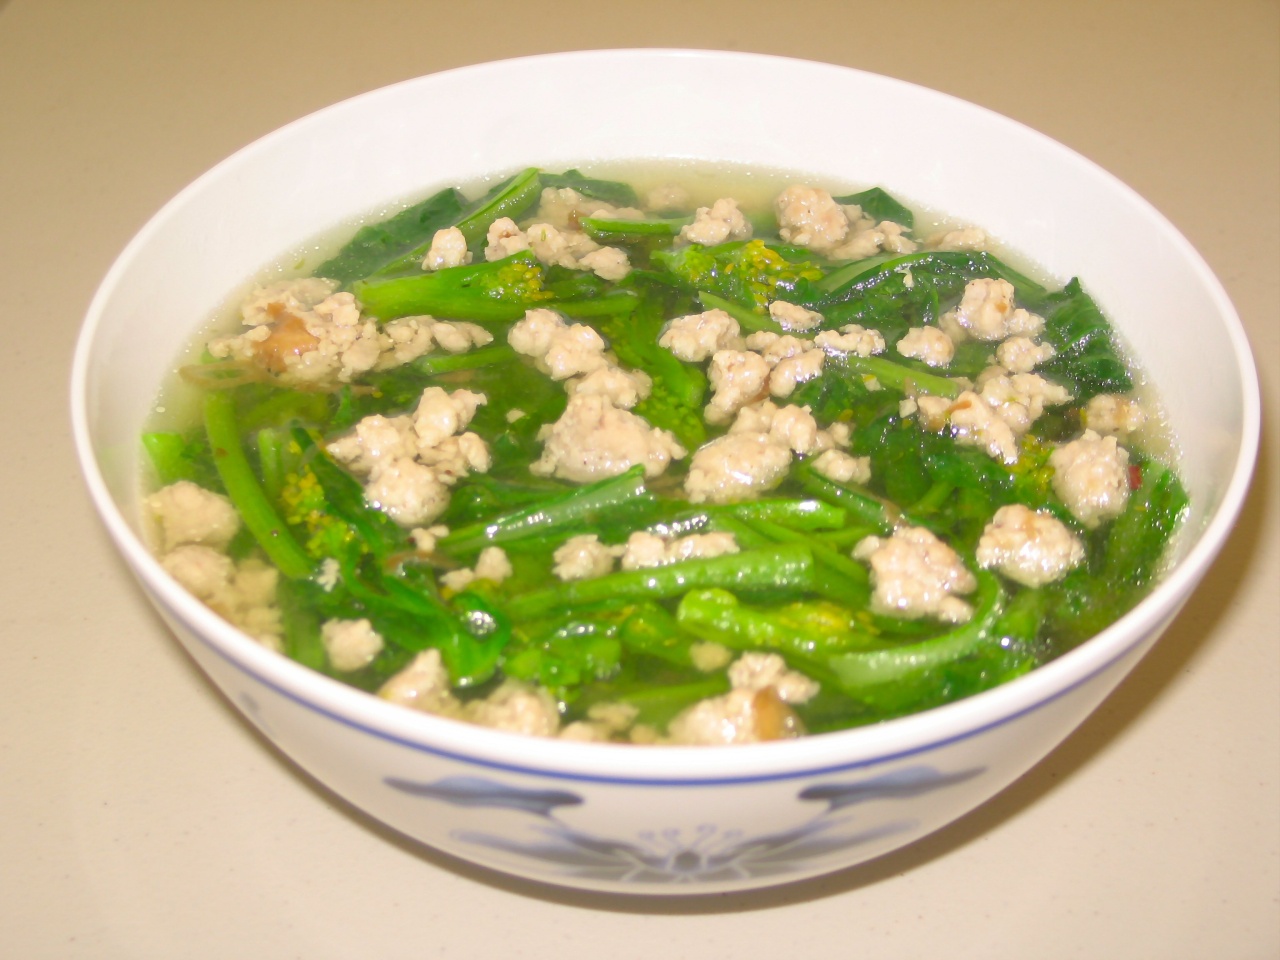 Canh cải ngọt